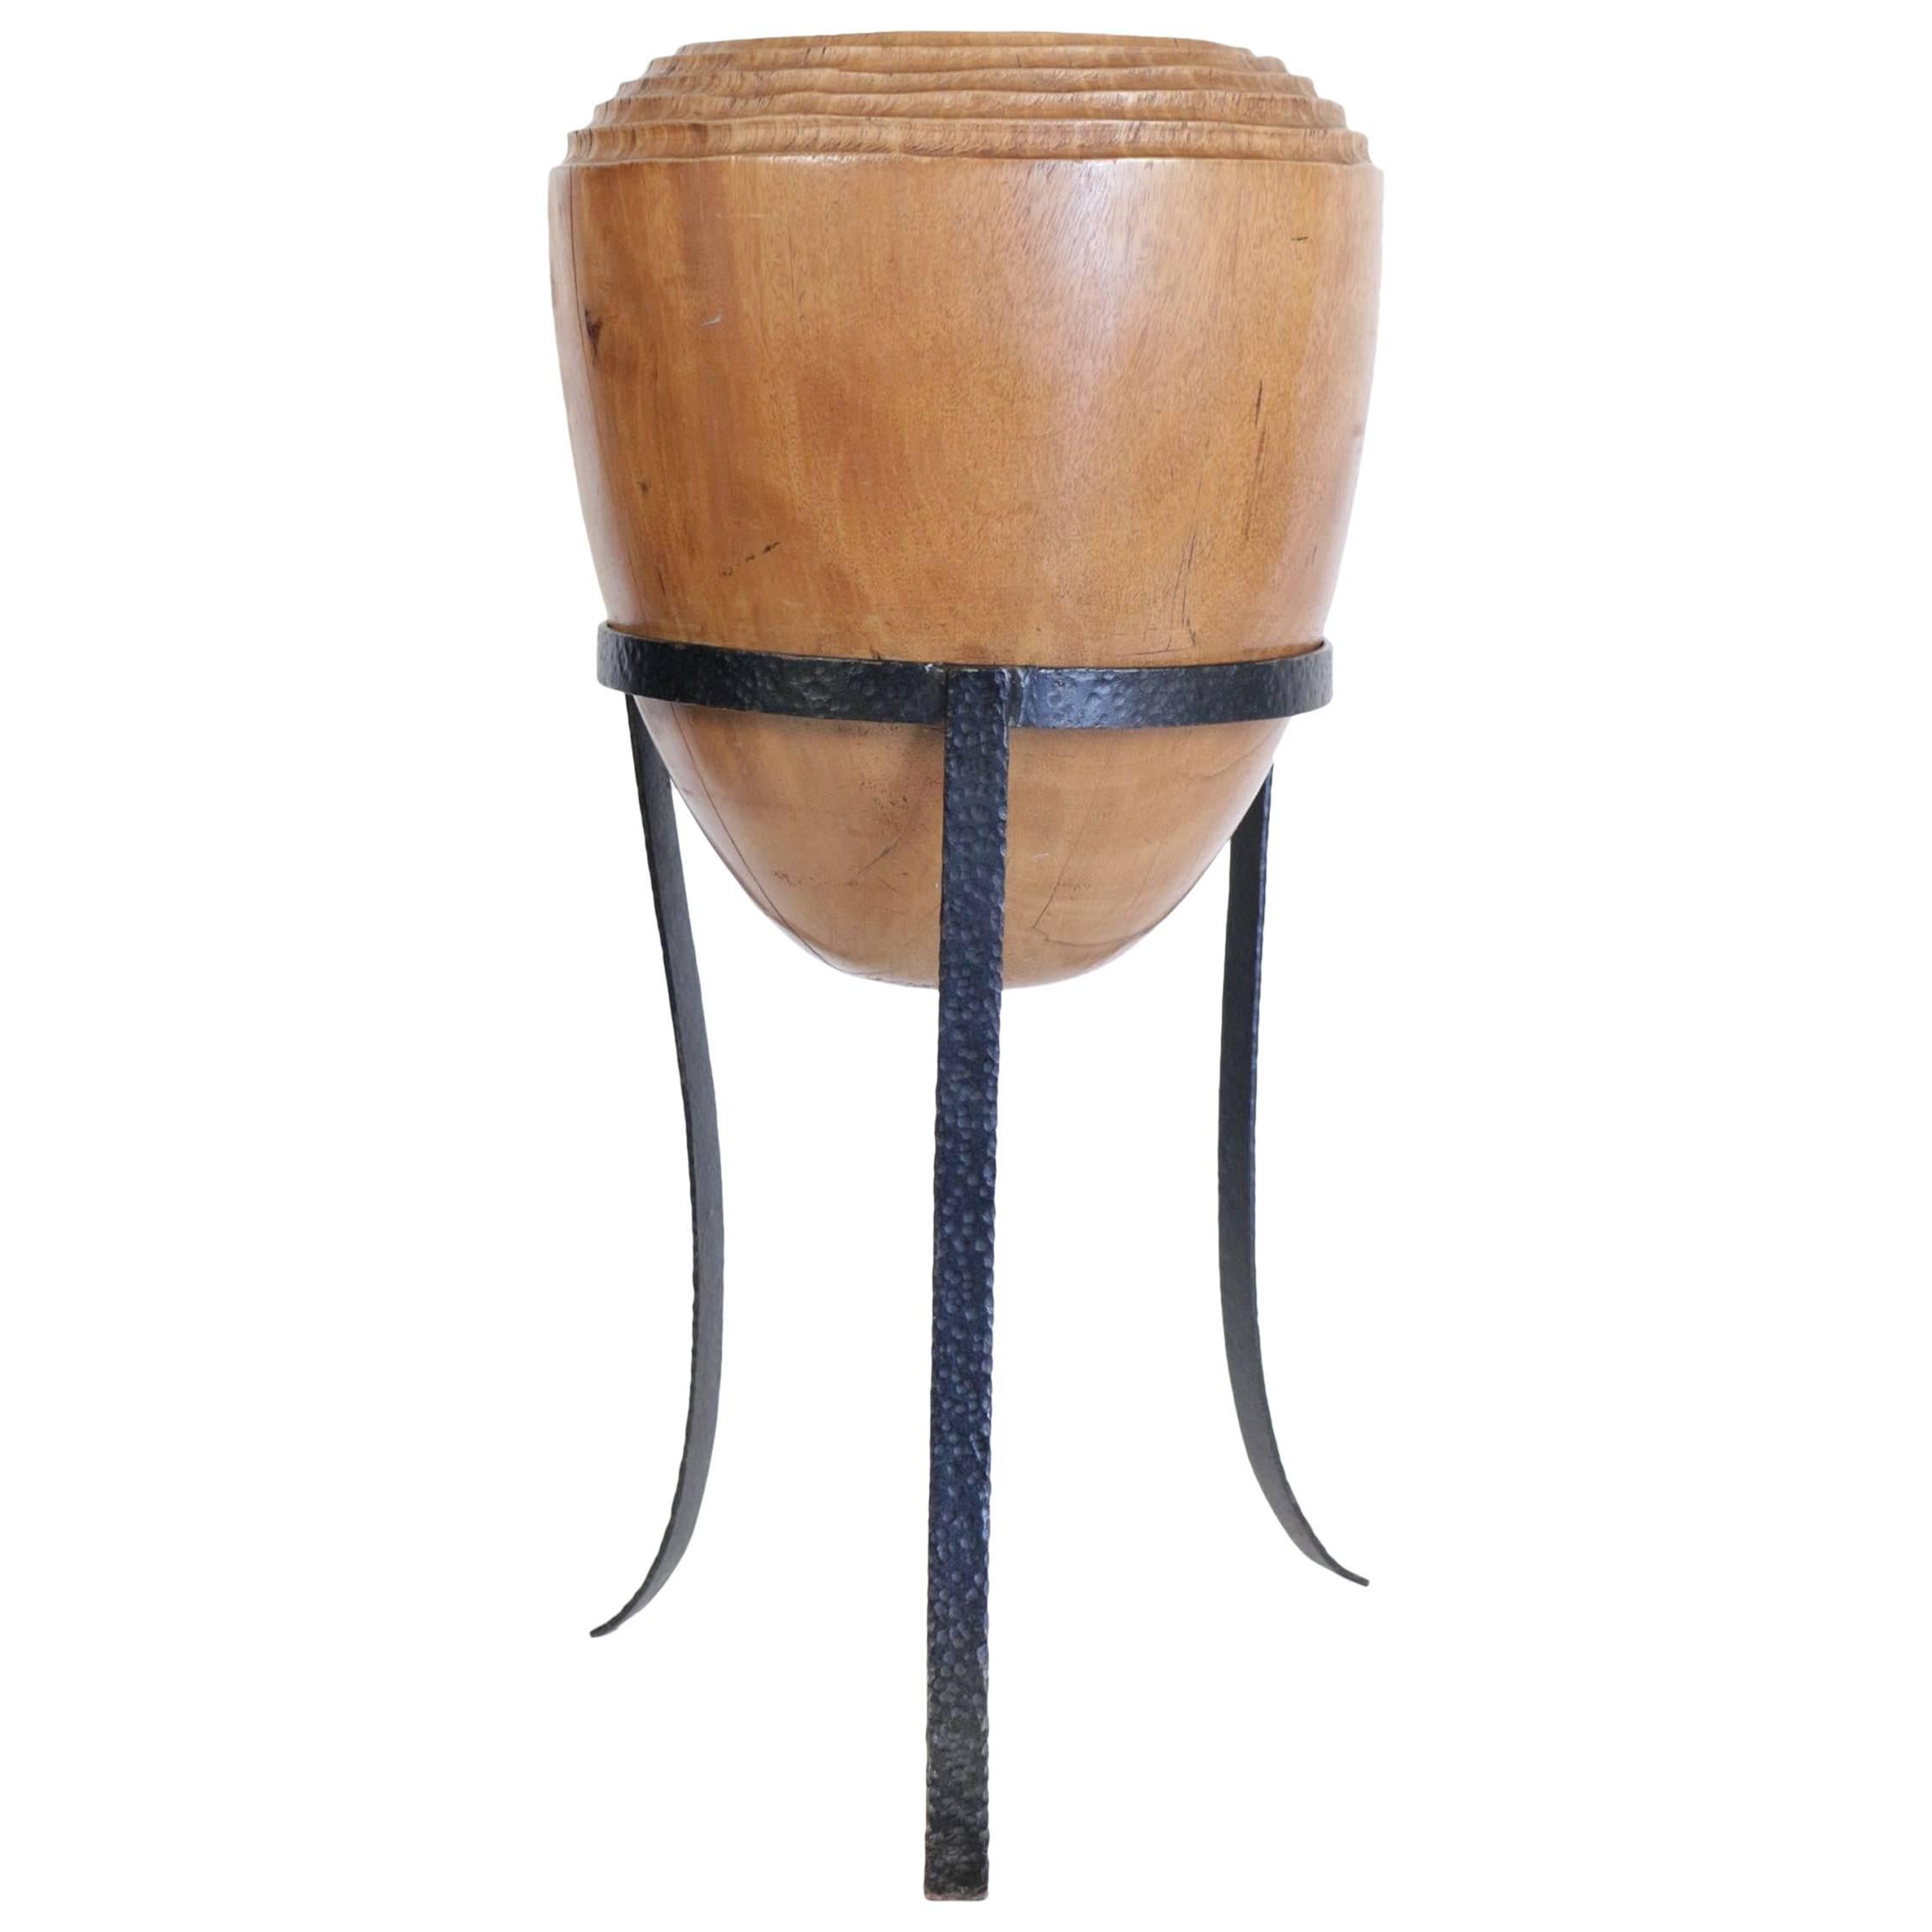 Large Mid-Century Modern Decorative Pot in Solid Wood in the Form of an Olive For Sale